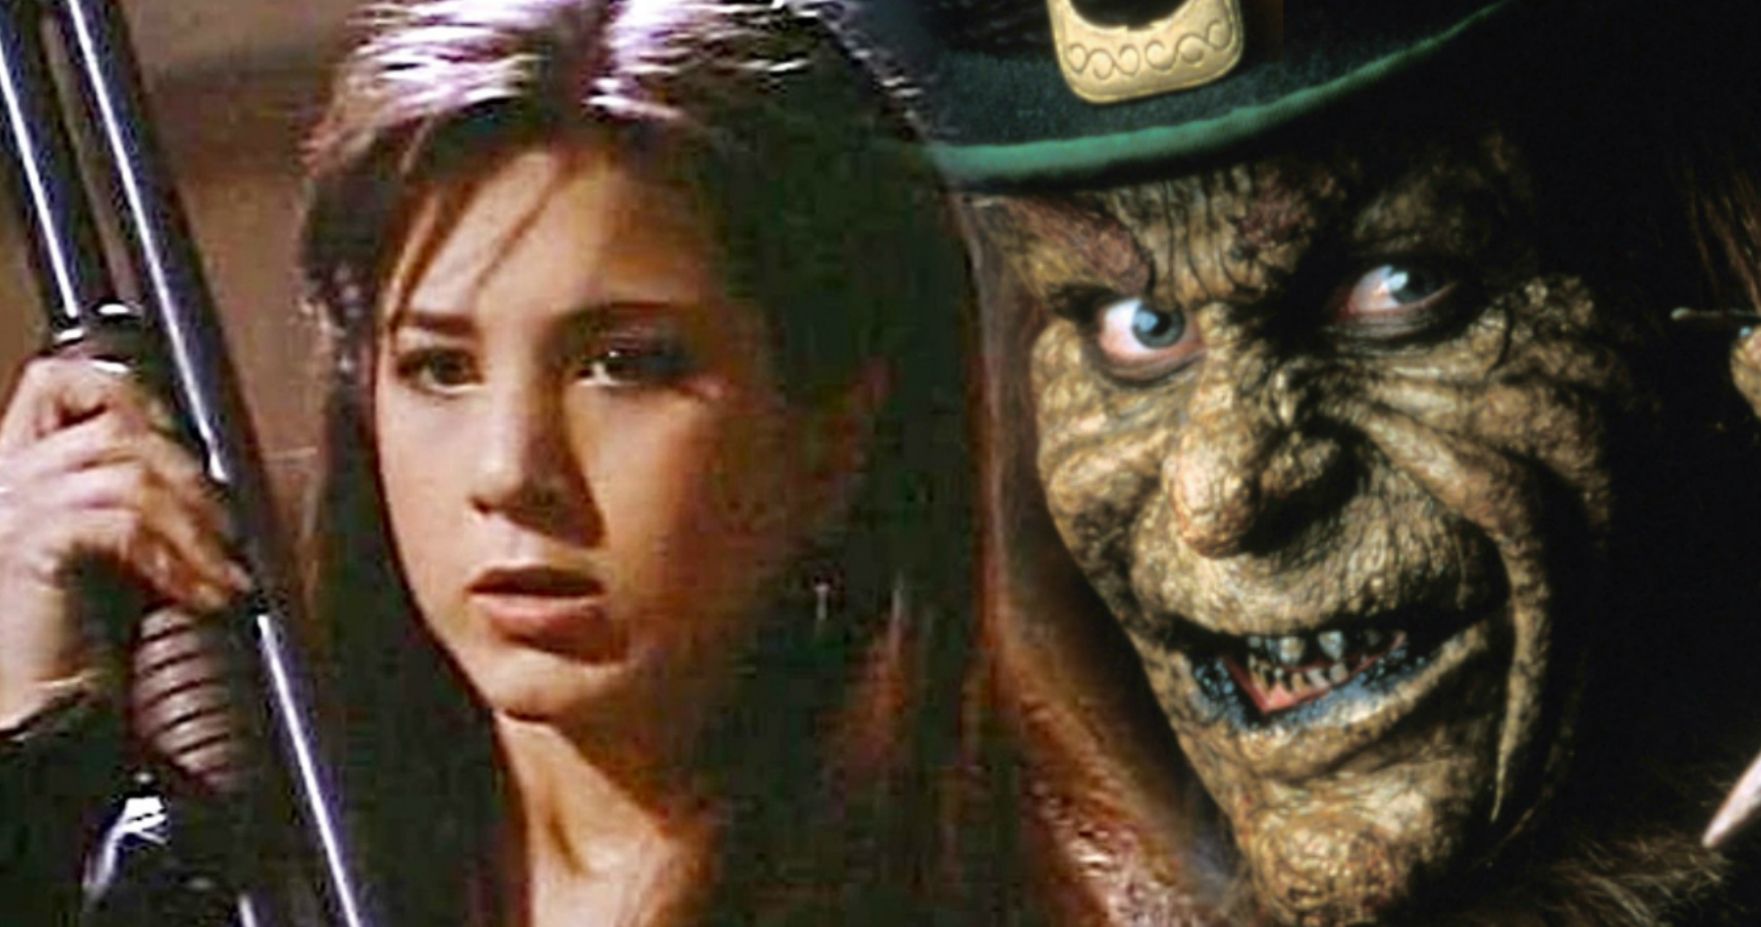 Jennifer Aniston Looks Back on Leprechaun, the Movie That Launched Her Career